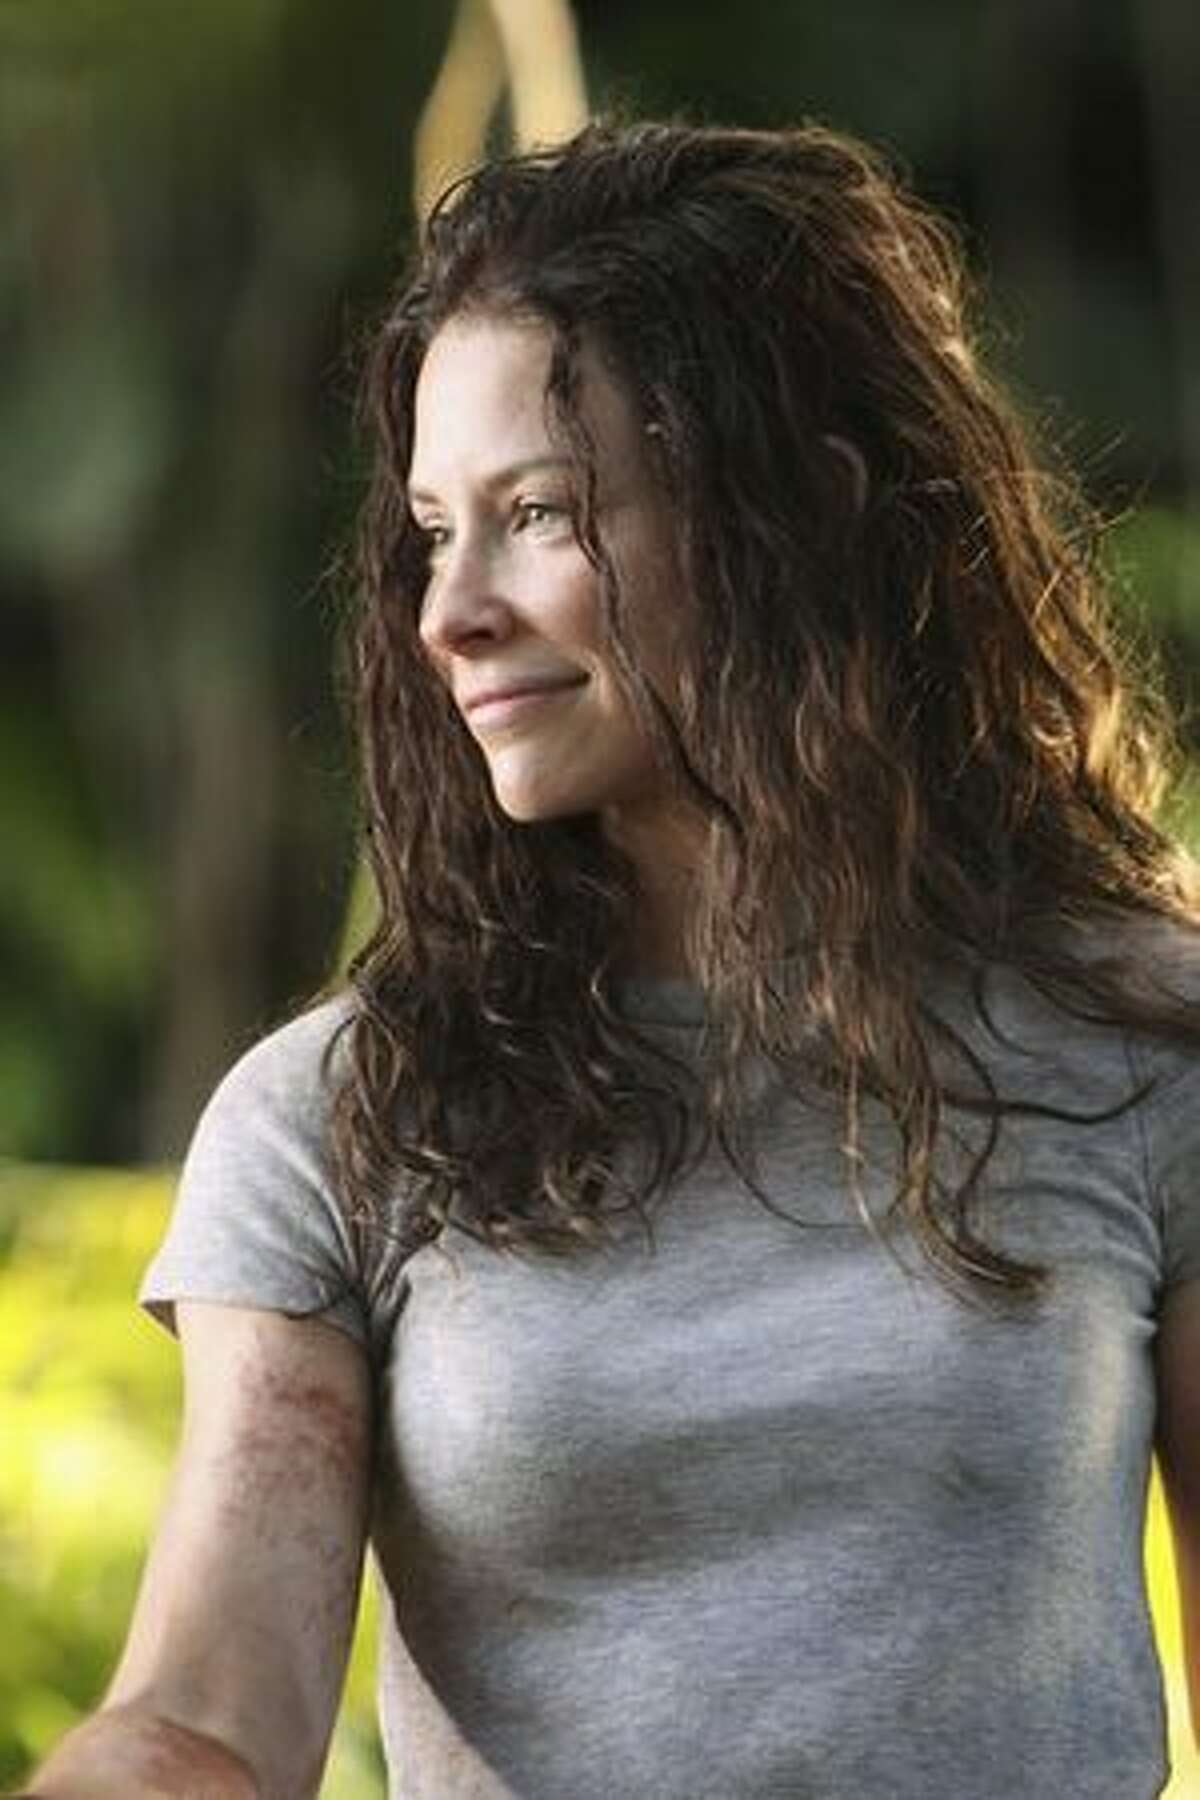 Evangeline Lilly as "Kate Austen" of "Lost."